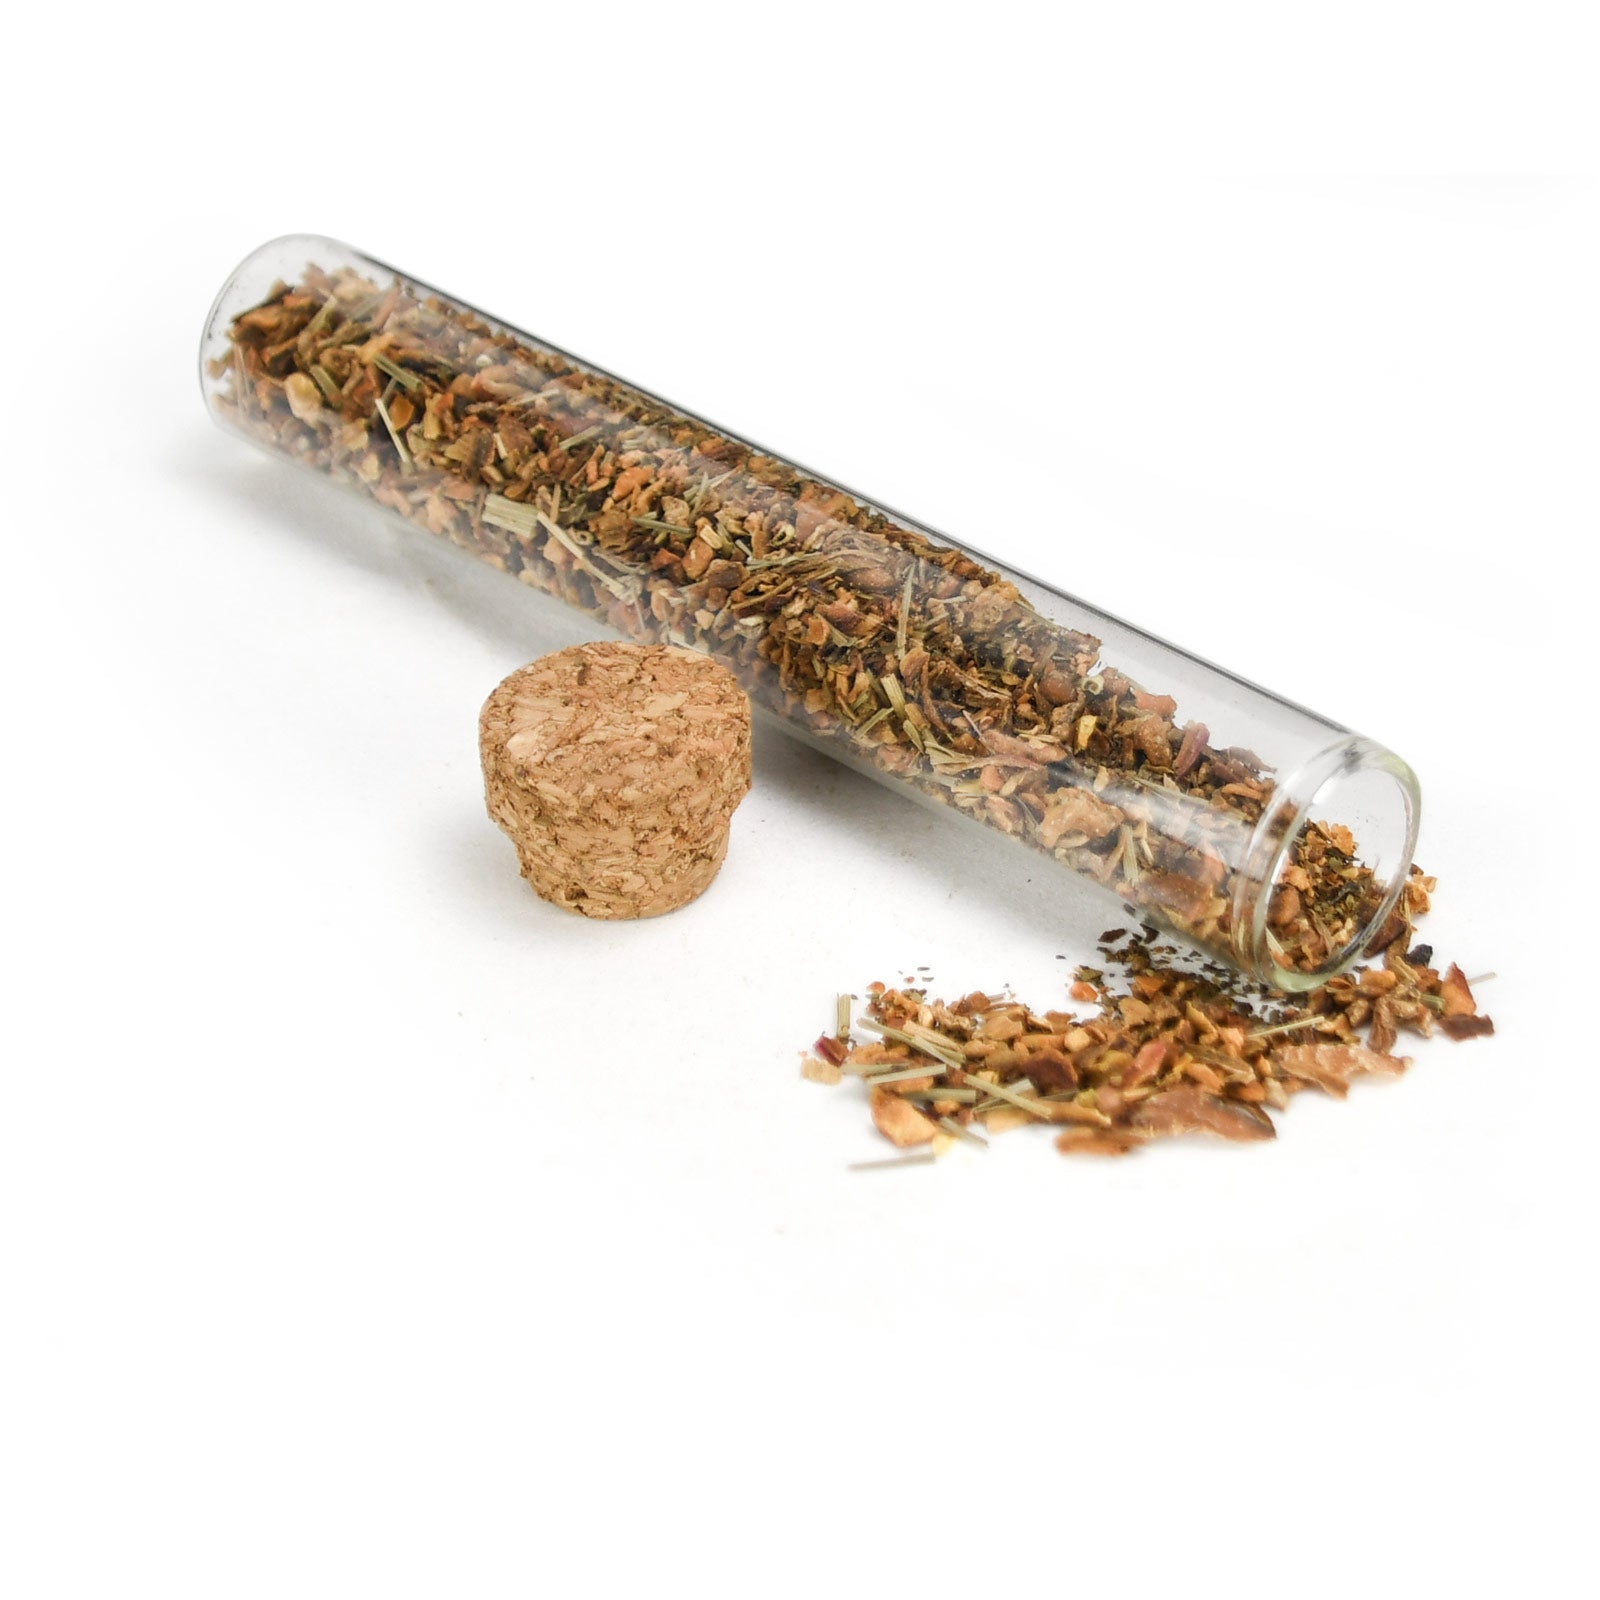 130mm Glass Pre-Roll Tube w/ Cork Top - 400 Count